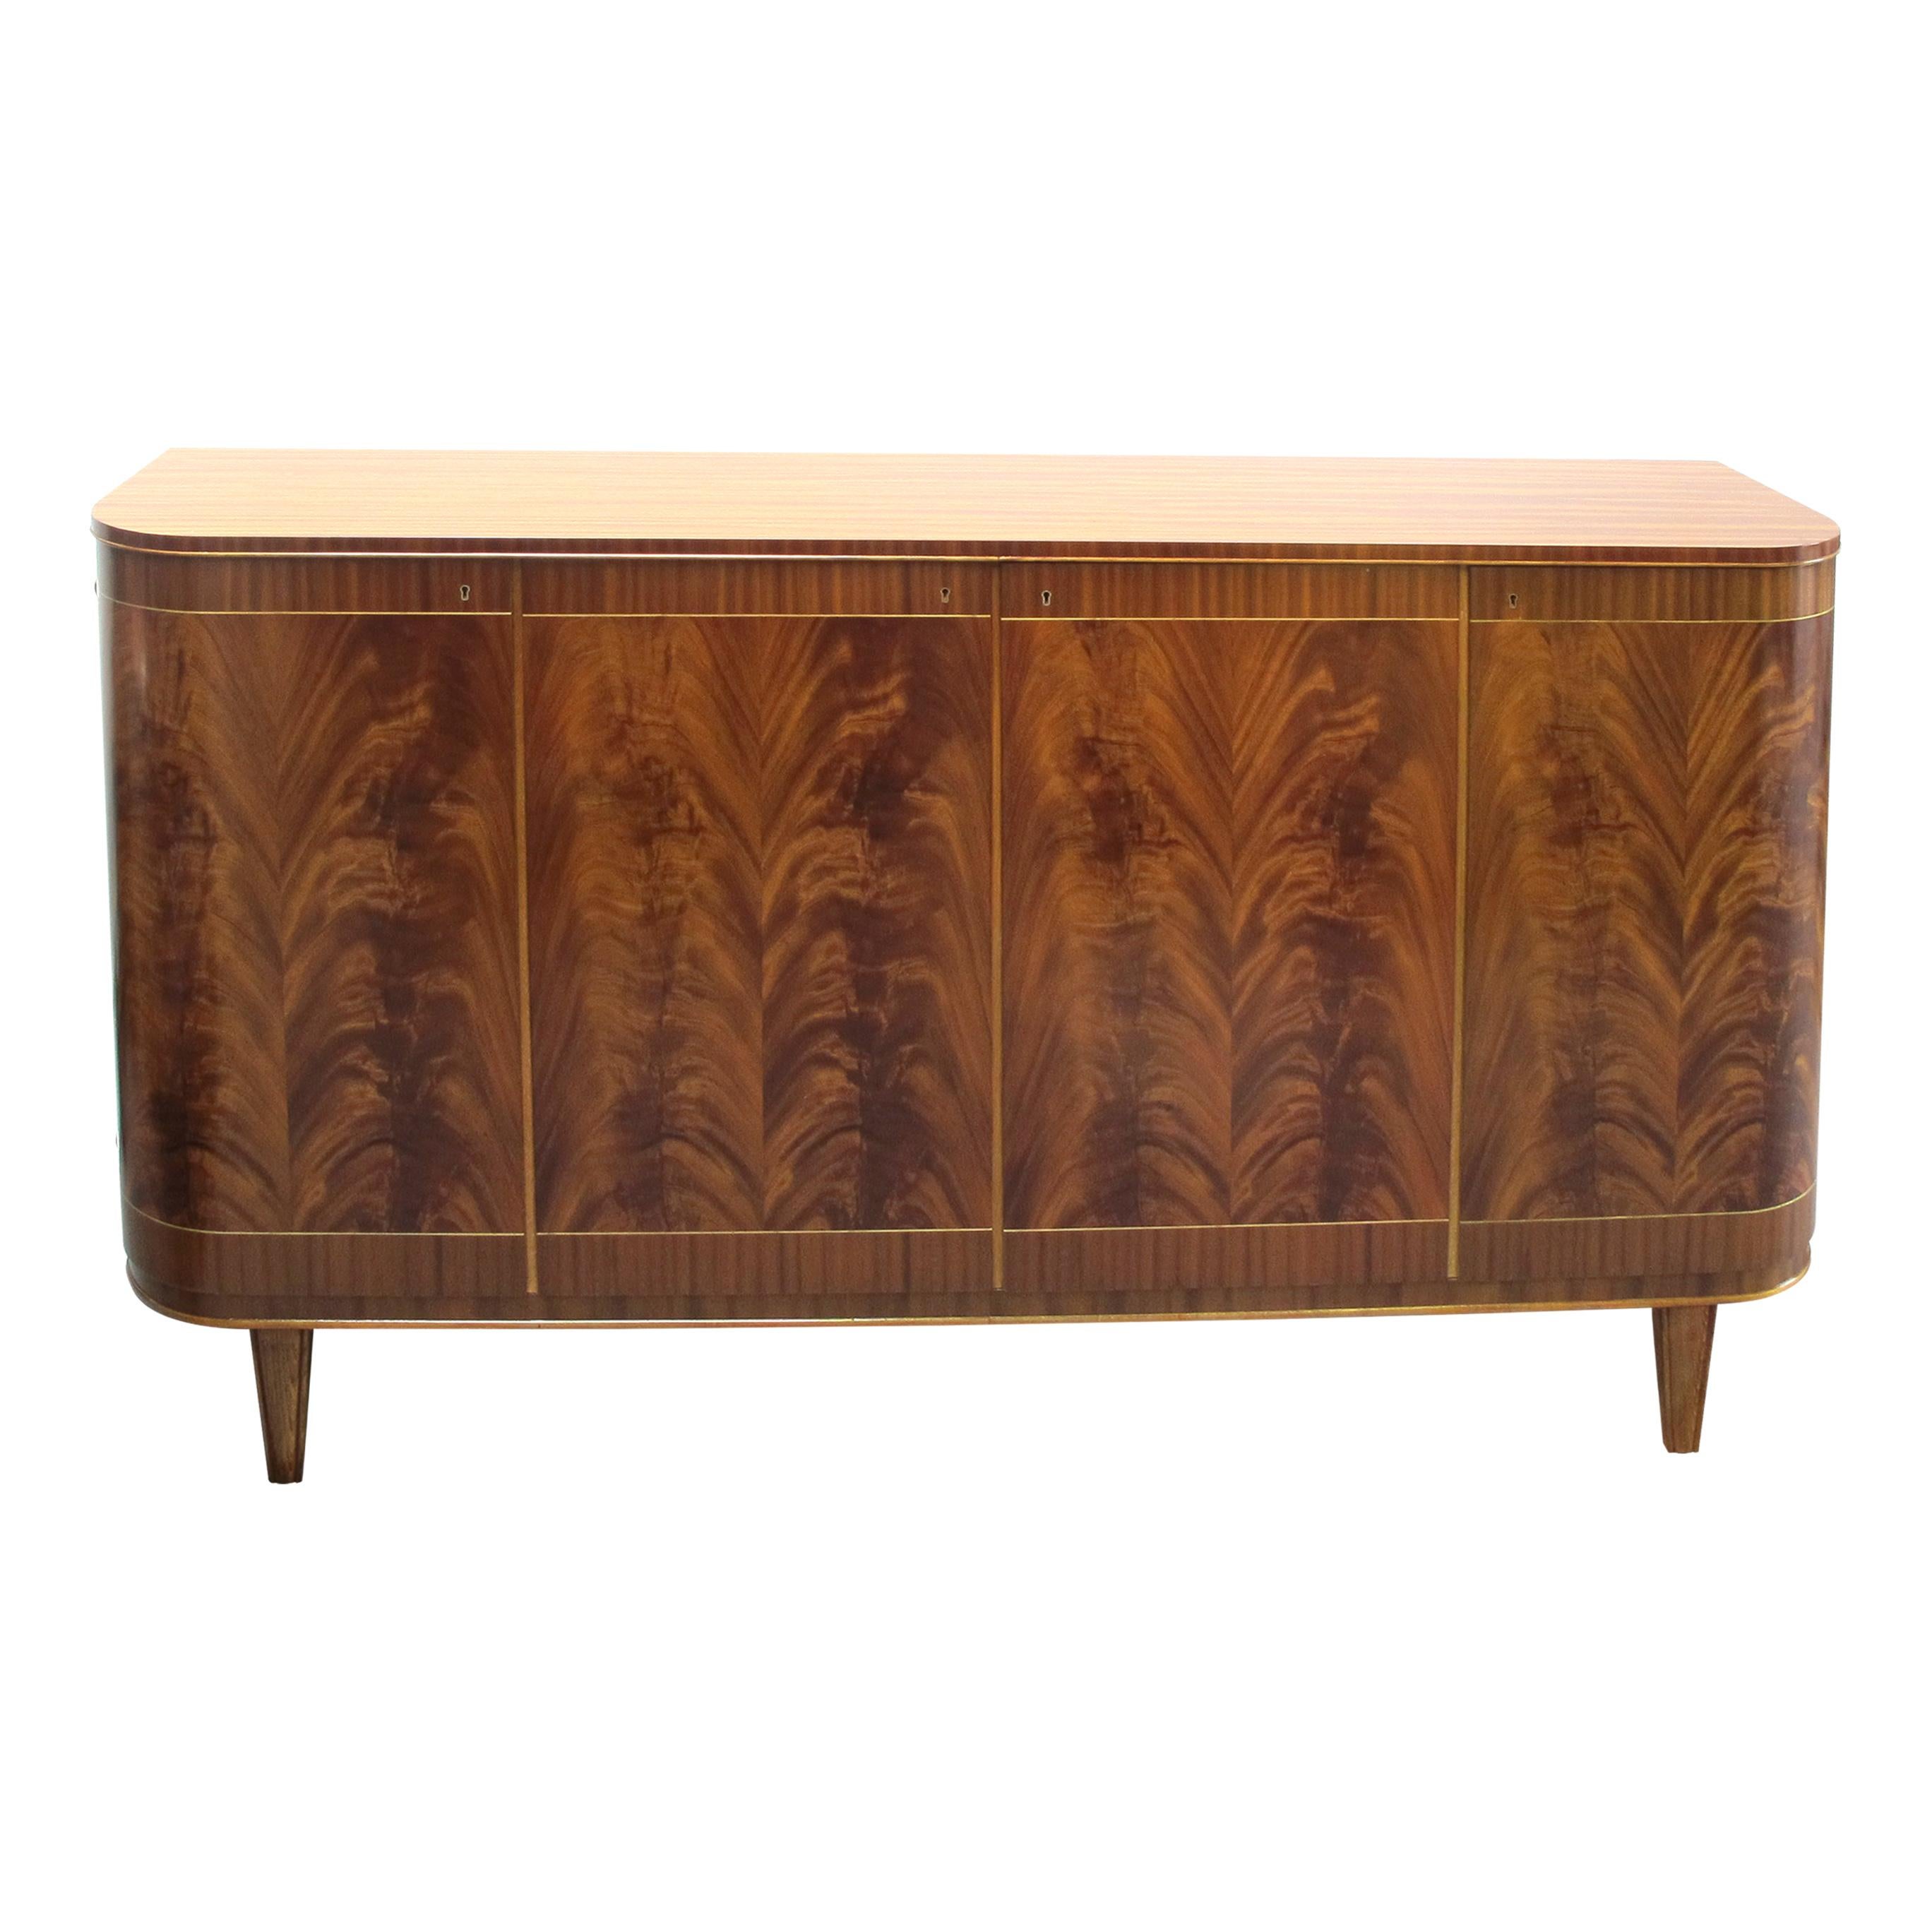 One of the first things that catch the eye is the sideboard's distinctive curved edges, which add a touch of sophistication to its overall appearance. The use of Cuban Mahogany with beautiful flame patterns on the front doors imparts a touch of